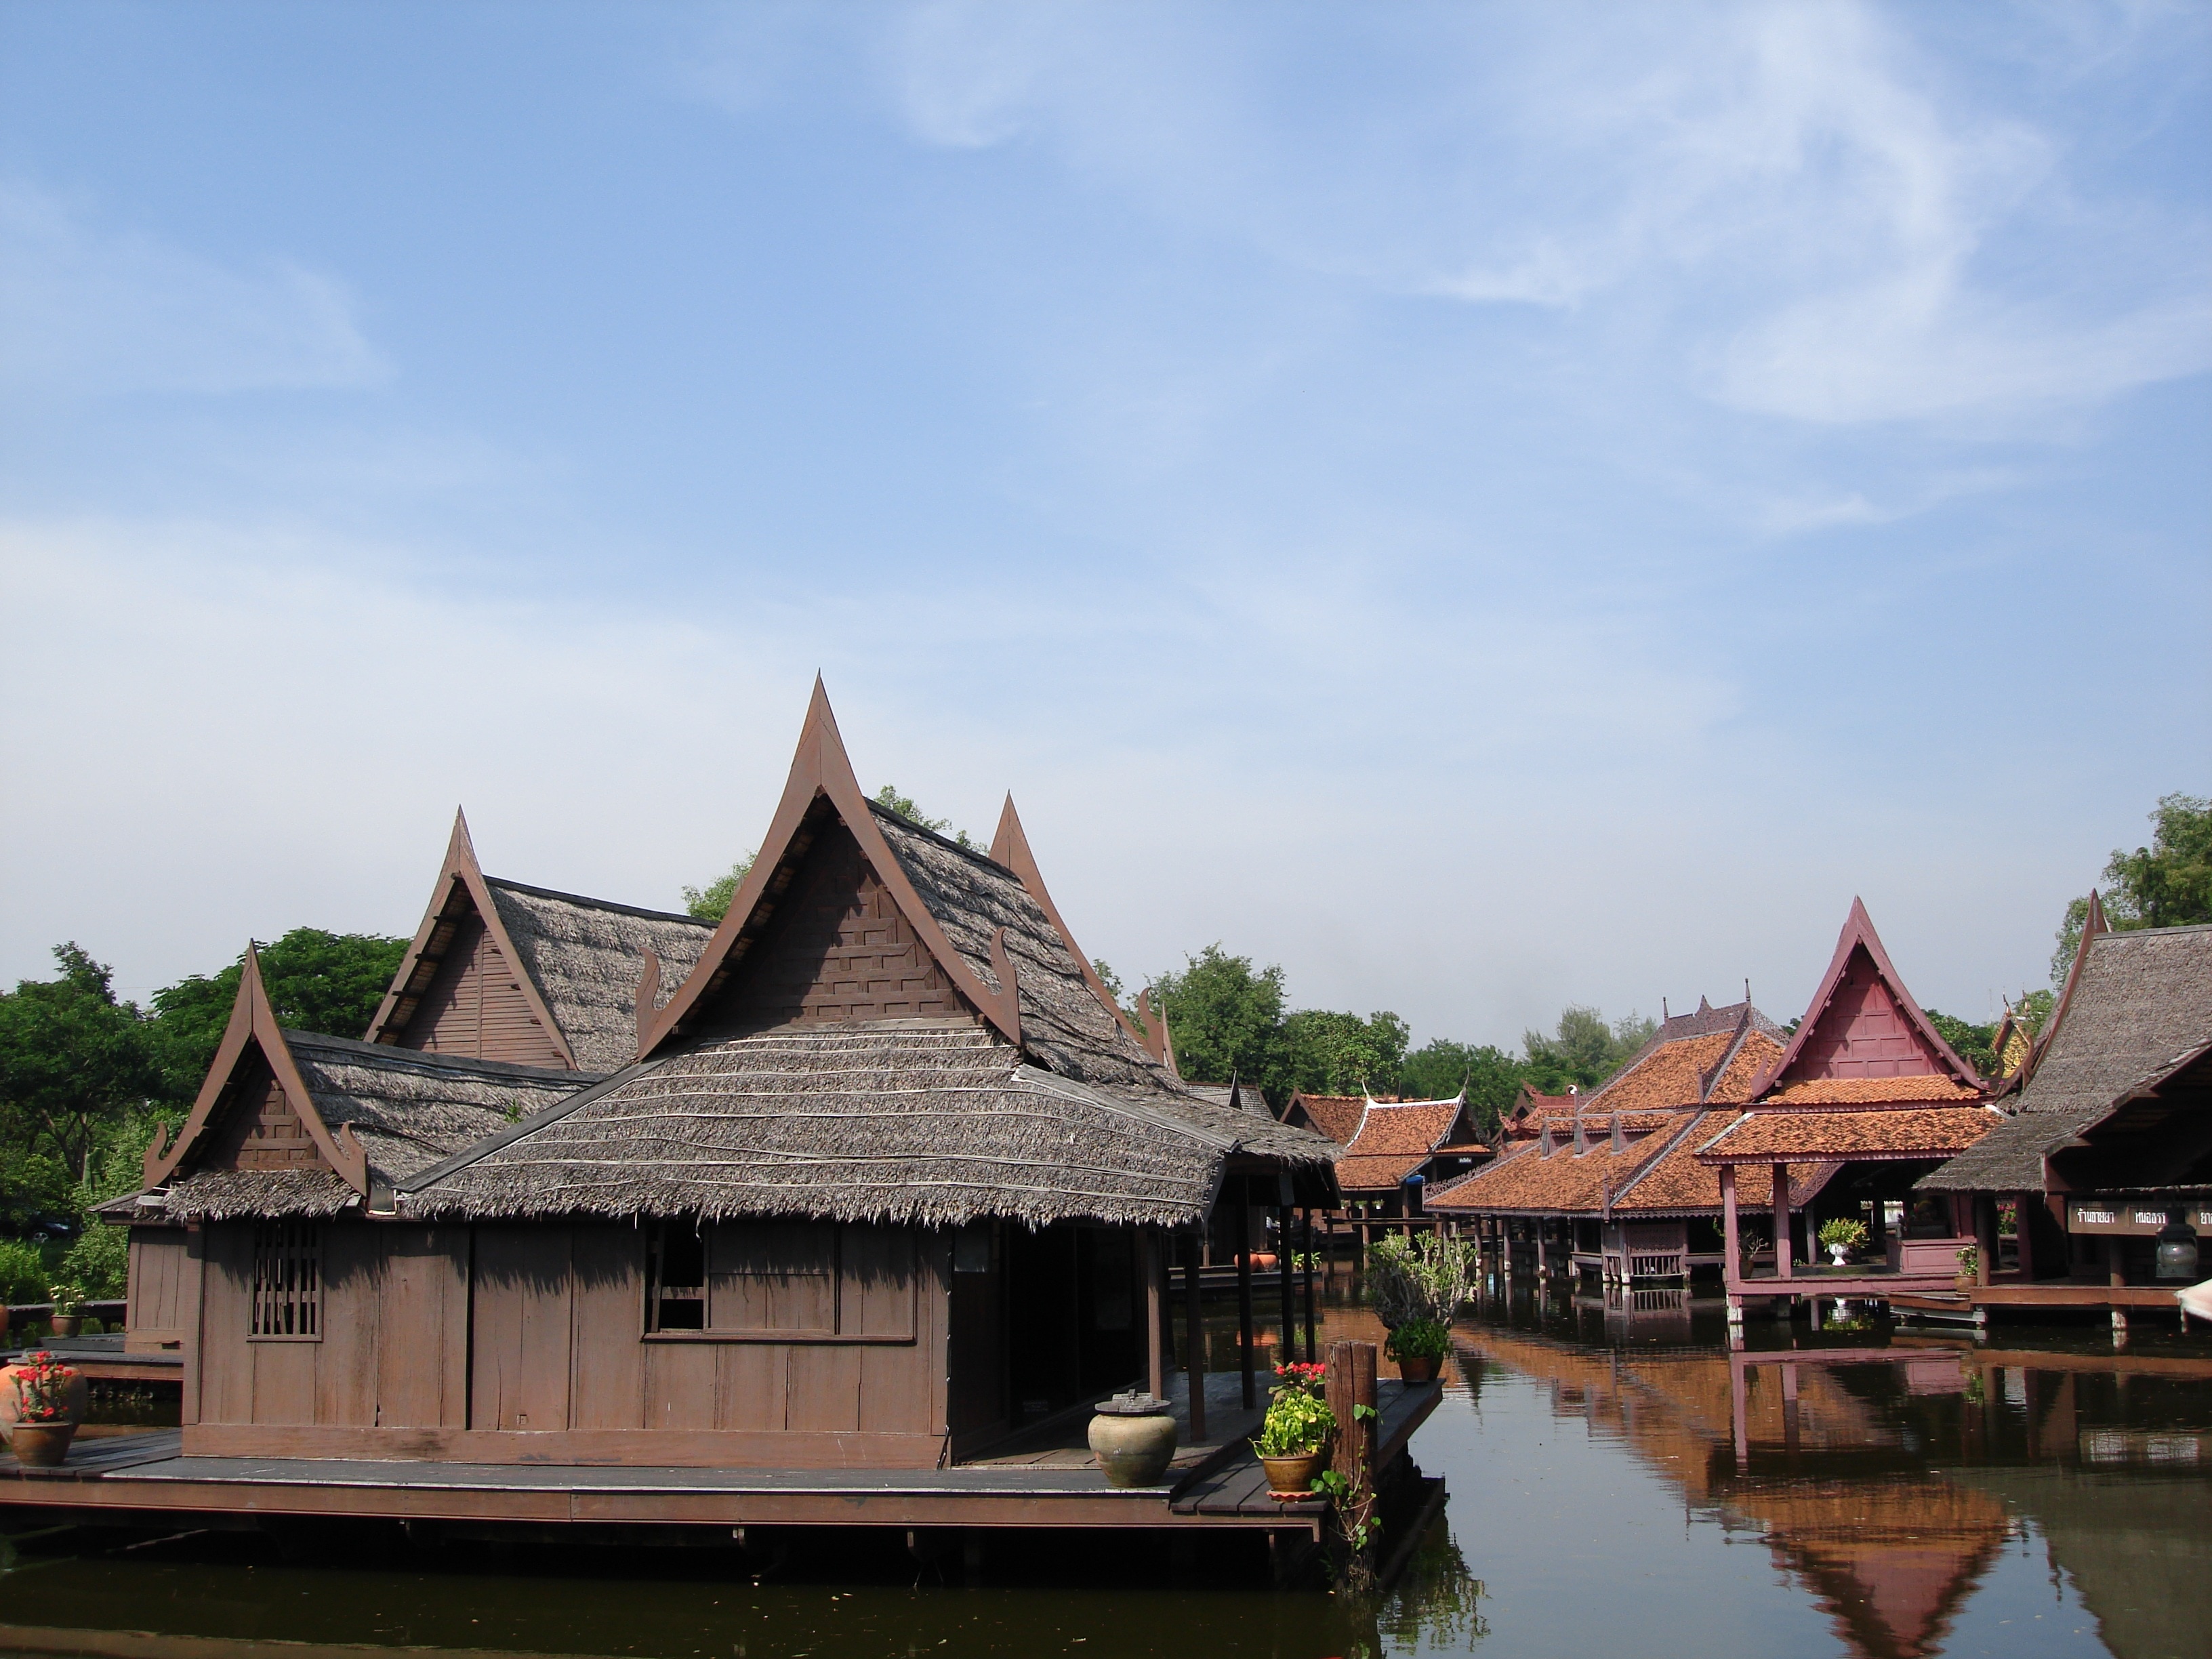 wooden houses near body of water